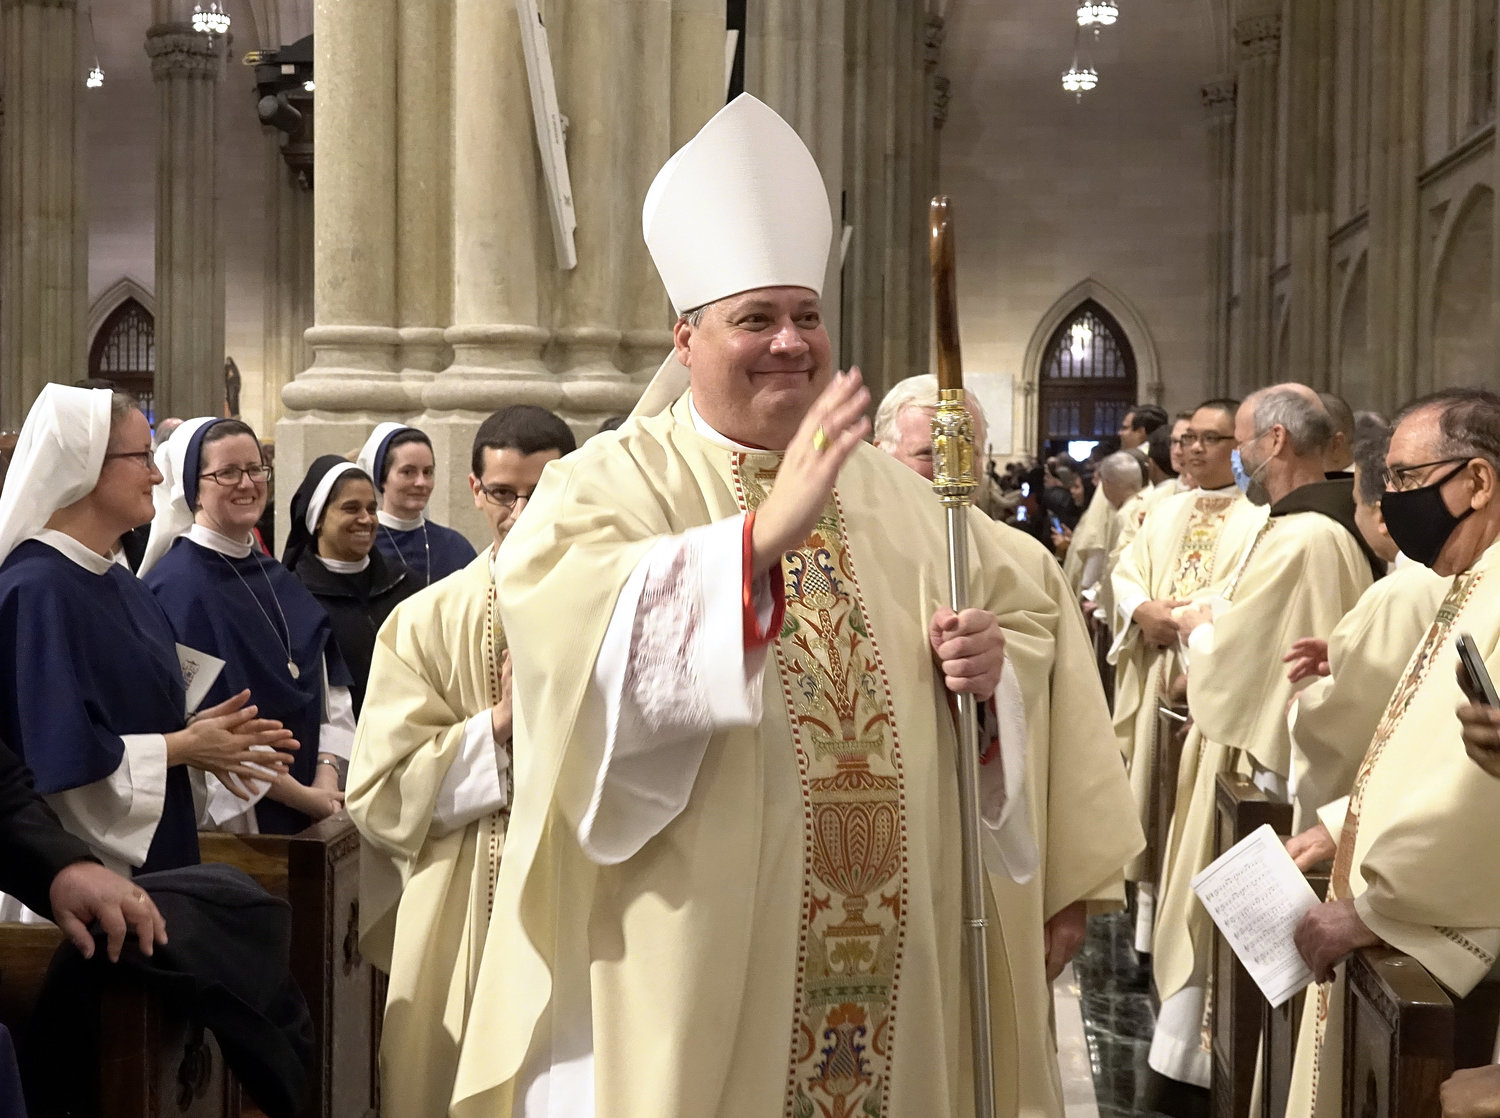 Auxiliary Bishop John S. Bonnici extends his blessing to the congregation.